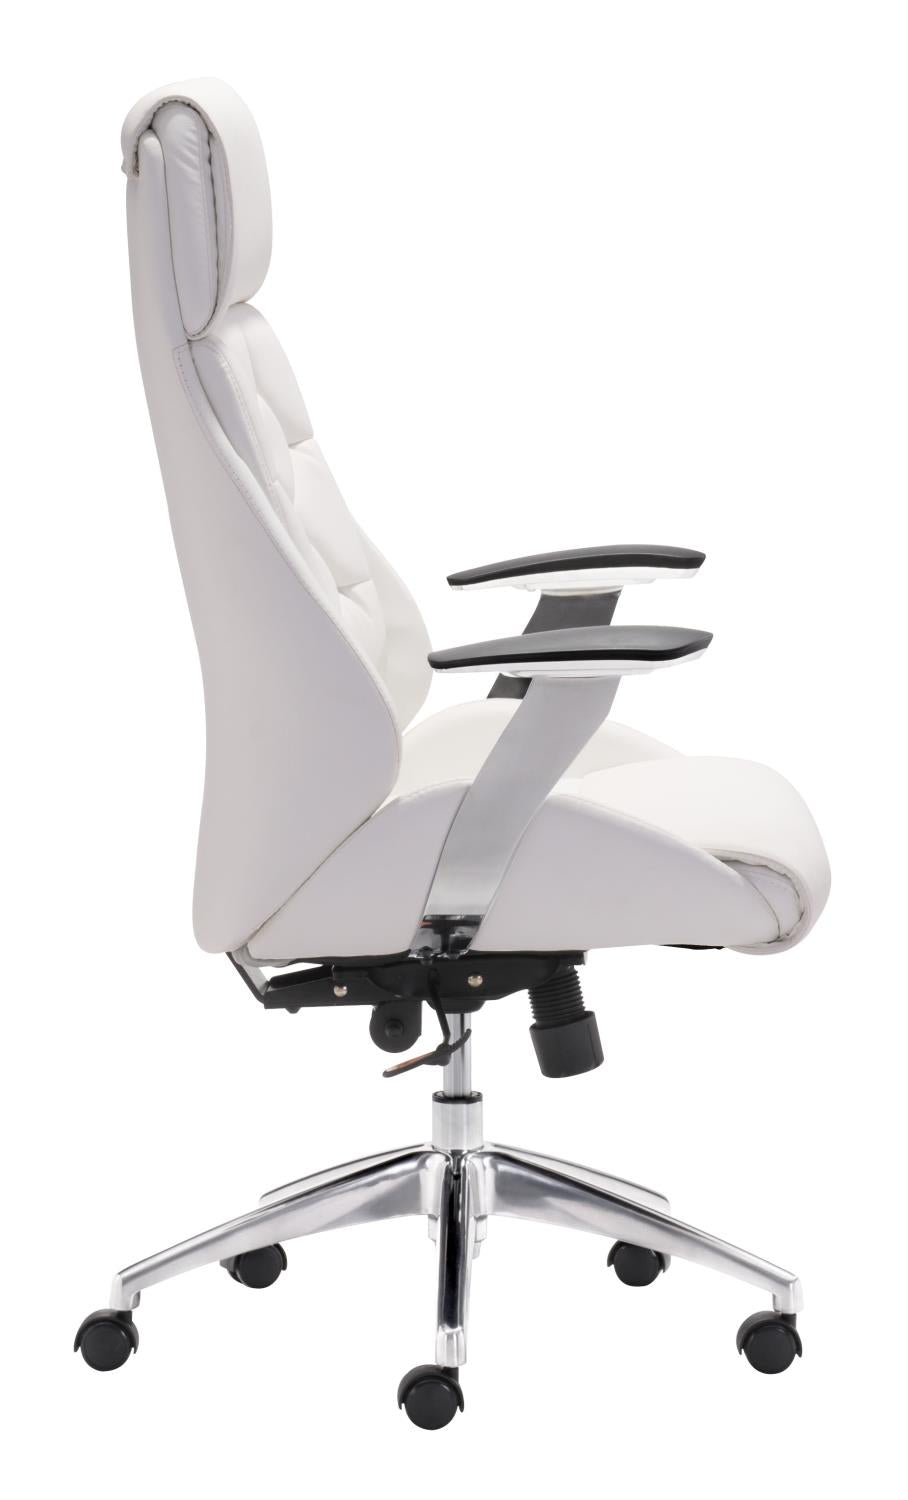 Verne Office Chair-White